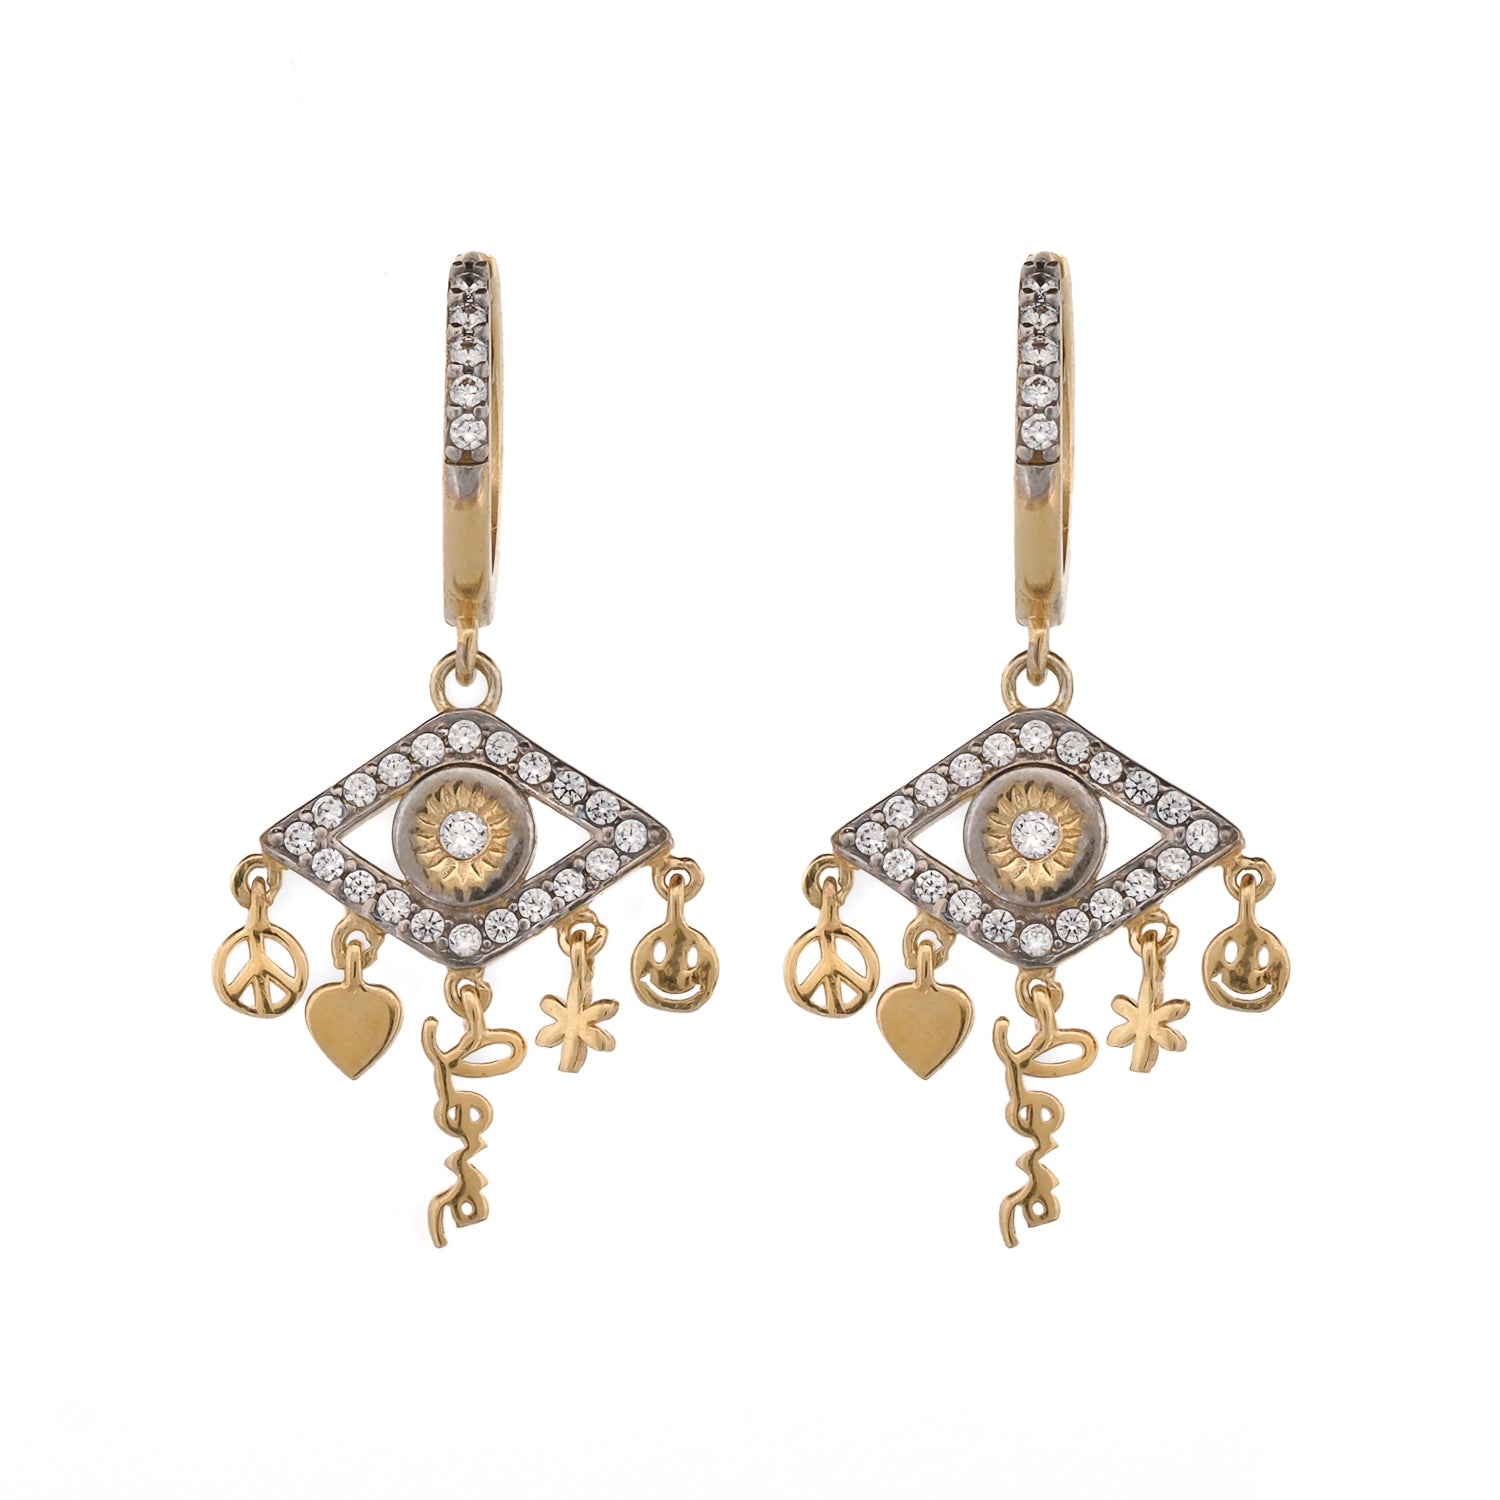 Jewelry Radiating Positive Energy: Peace & Love Gold Earrings